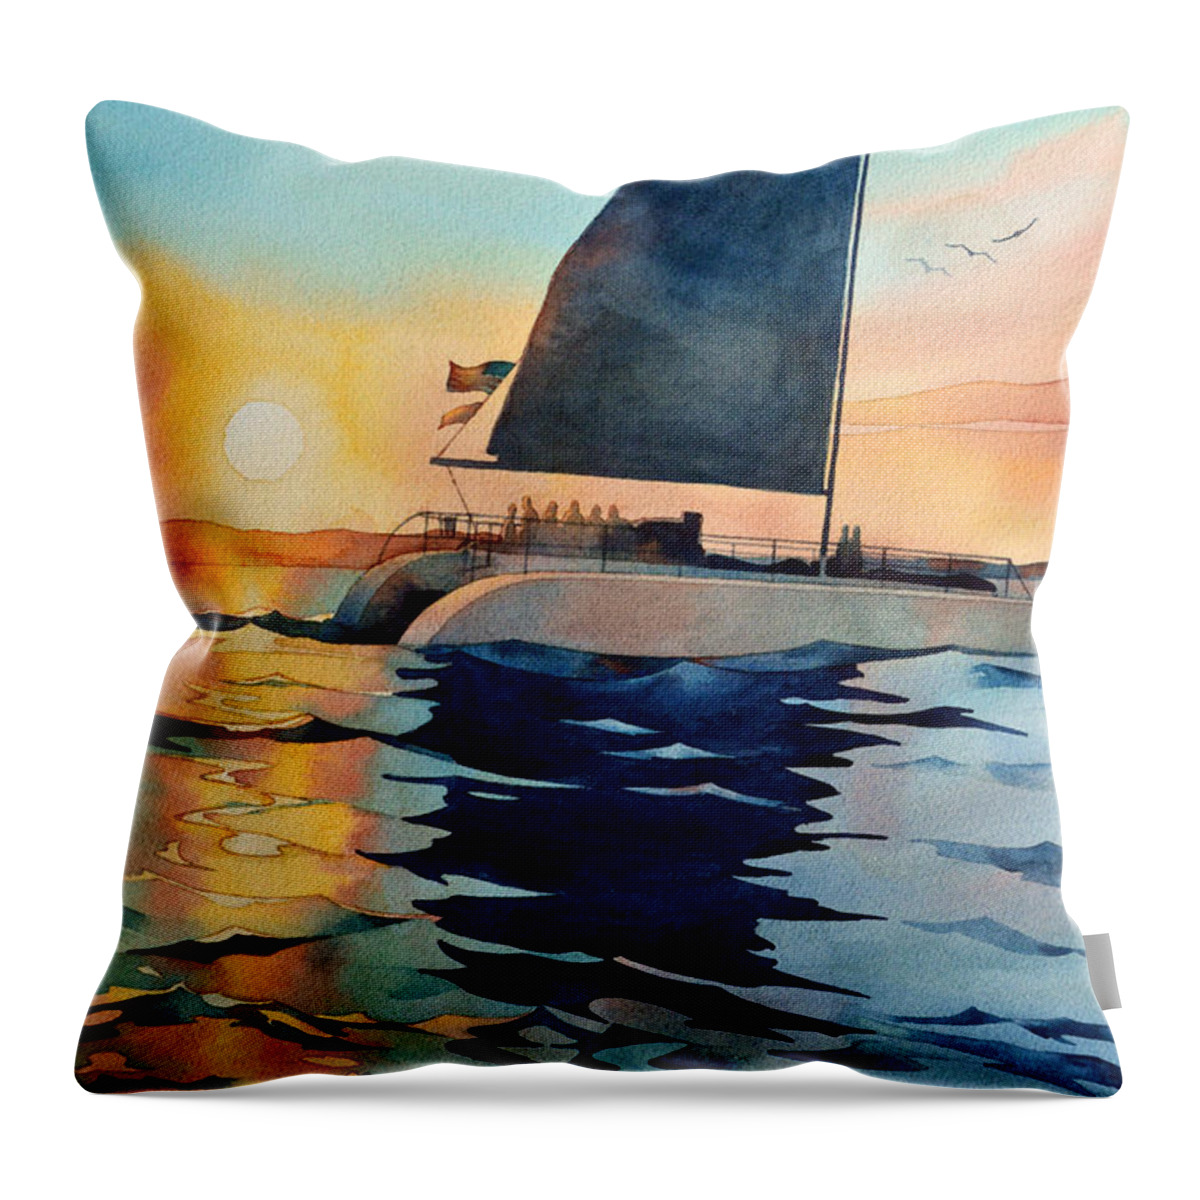 Water Throw Pillow featuring the painting Sunset Boulevard by Mick Williams